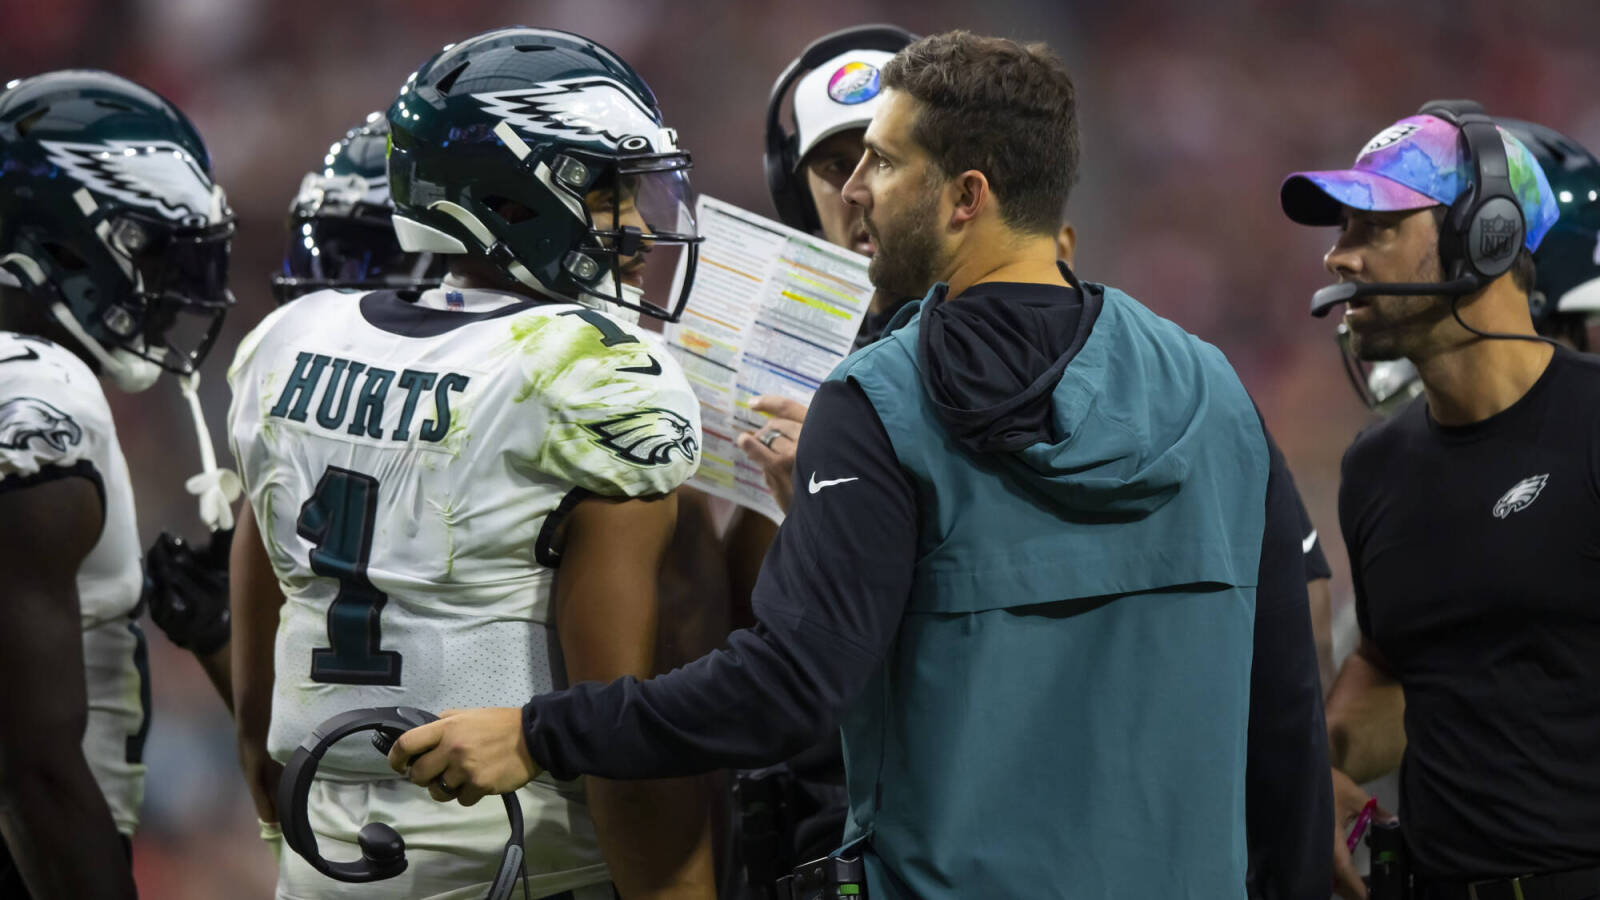 Insider provides concerning details about the Eagles' late-season collapse